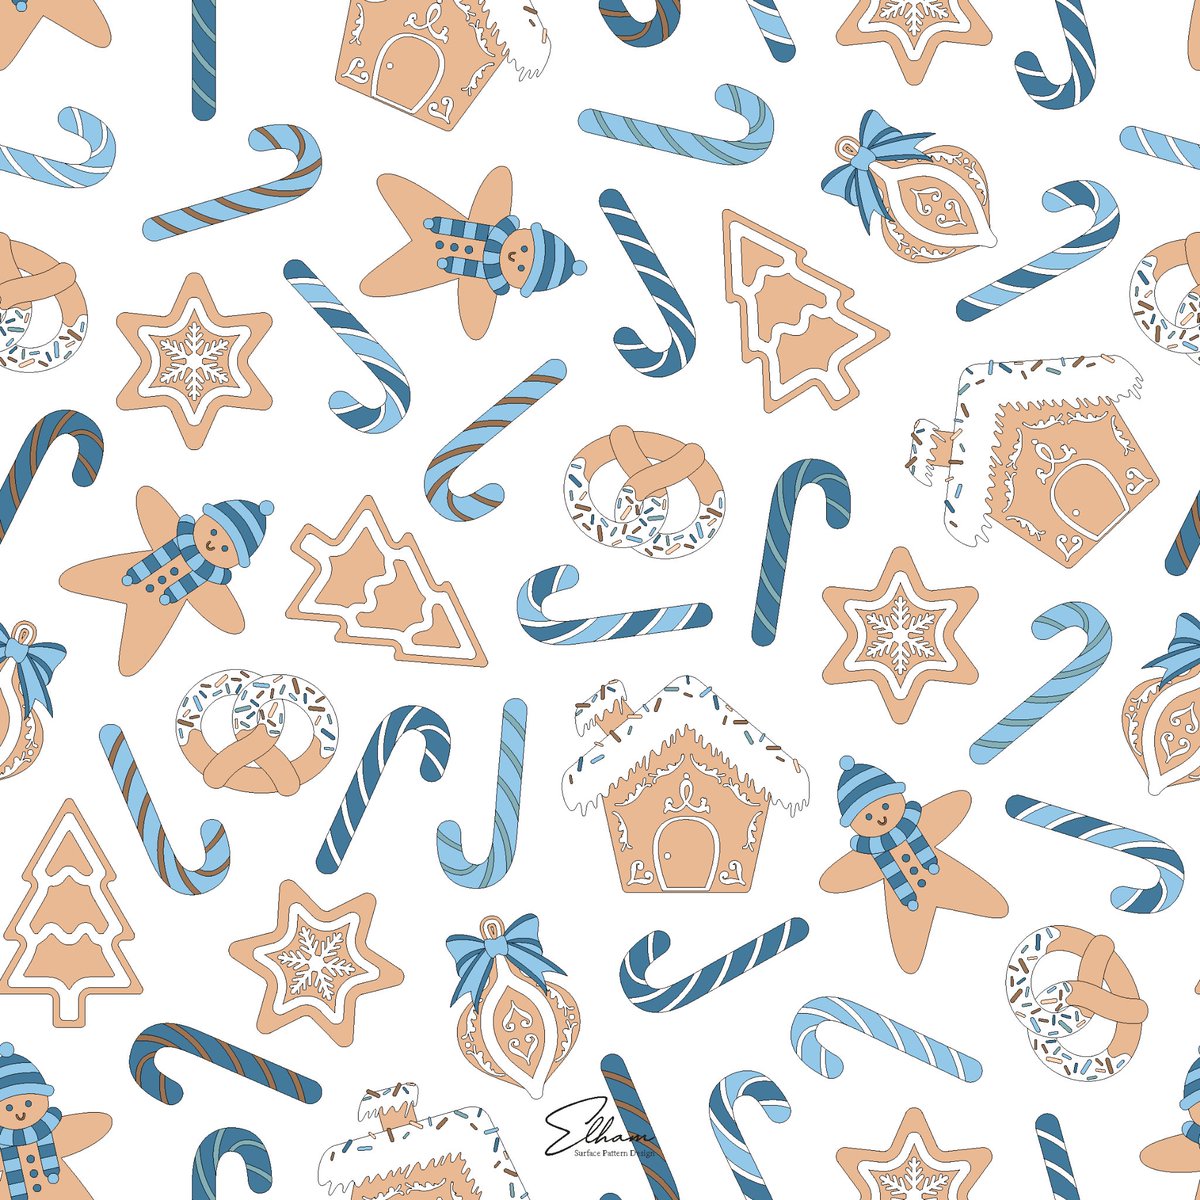 Here it is, the first pattern of my Christmas collection with gingerbread, pretzel and candy cane. Hope it brings you some holiday cheers! 🥳☃️
#Christmas , #christmasdecorations , #surfacepattern , #patterndesigner , #printdesigner , #textiledesigner , #illustrationart